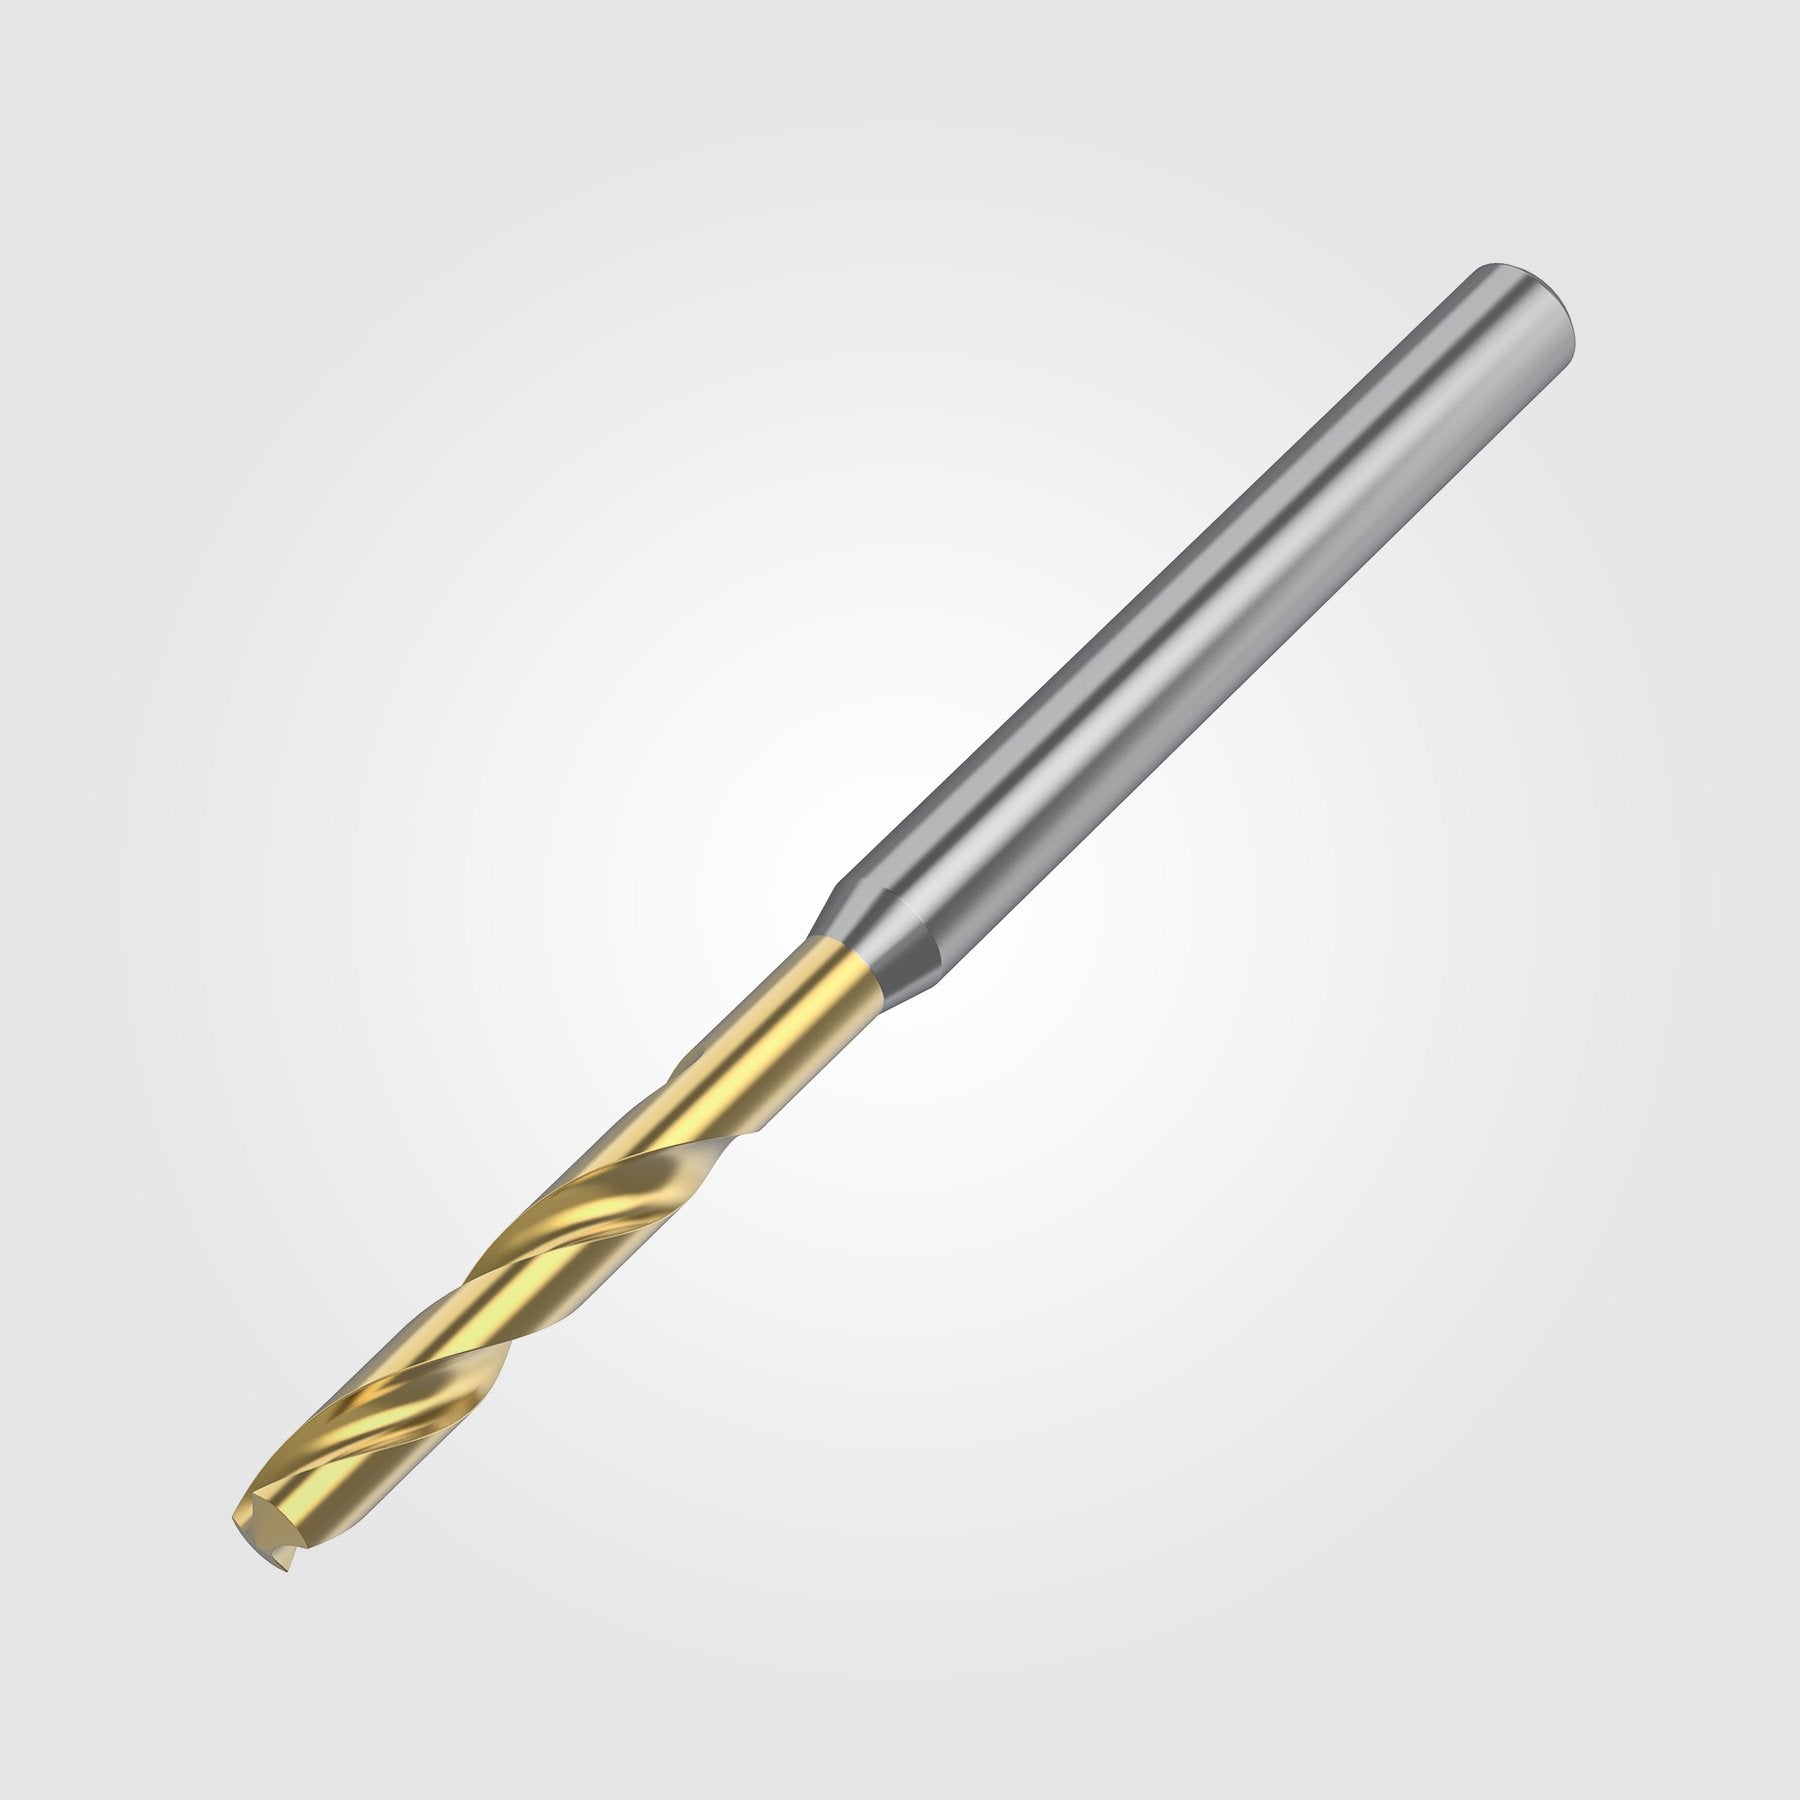 GOdrill (THROUGH COOLANT) | 14.288mm / .5625" / 3xD | SOLID CARBIDE DRILL | 4151254